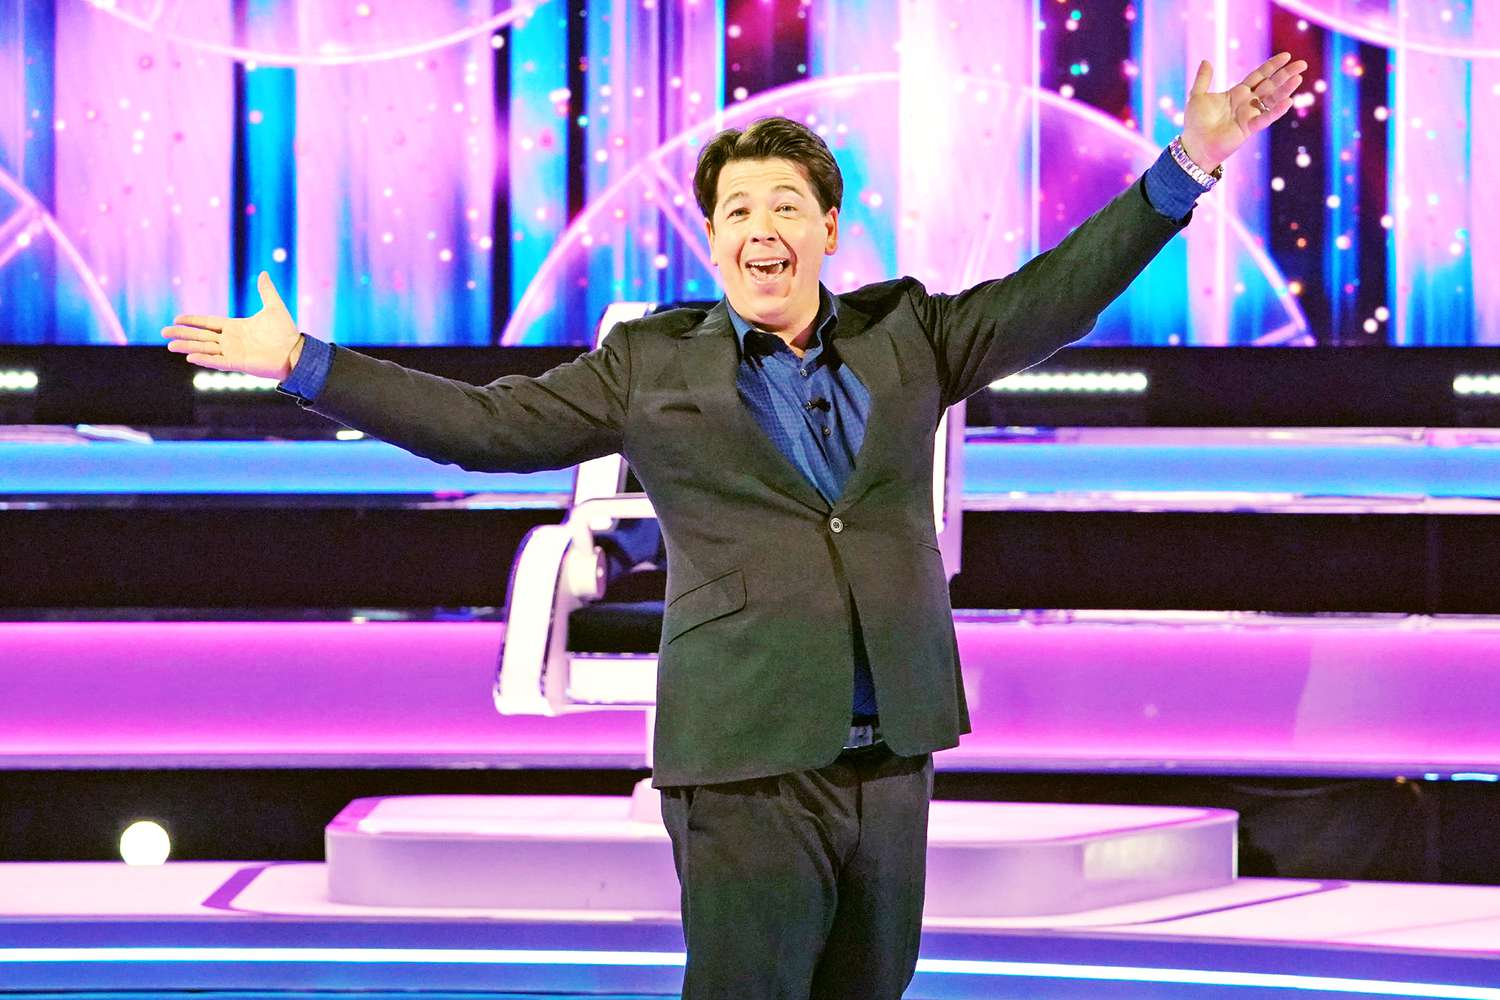 THE WHEEL -- "A Spin, A Twin & A Win" Episode 109 -- Pictured: Michael McIntyre -- (Photo by: Chris Haston/NBC)